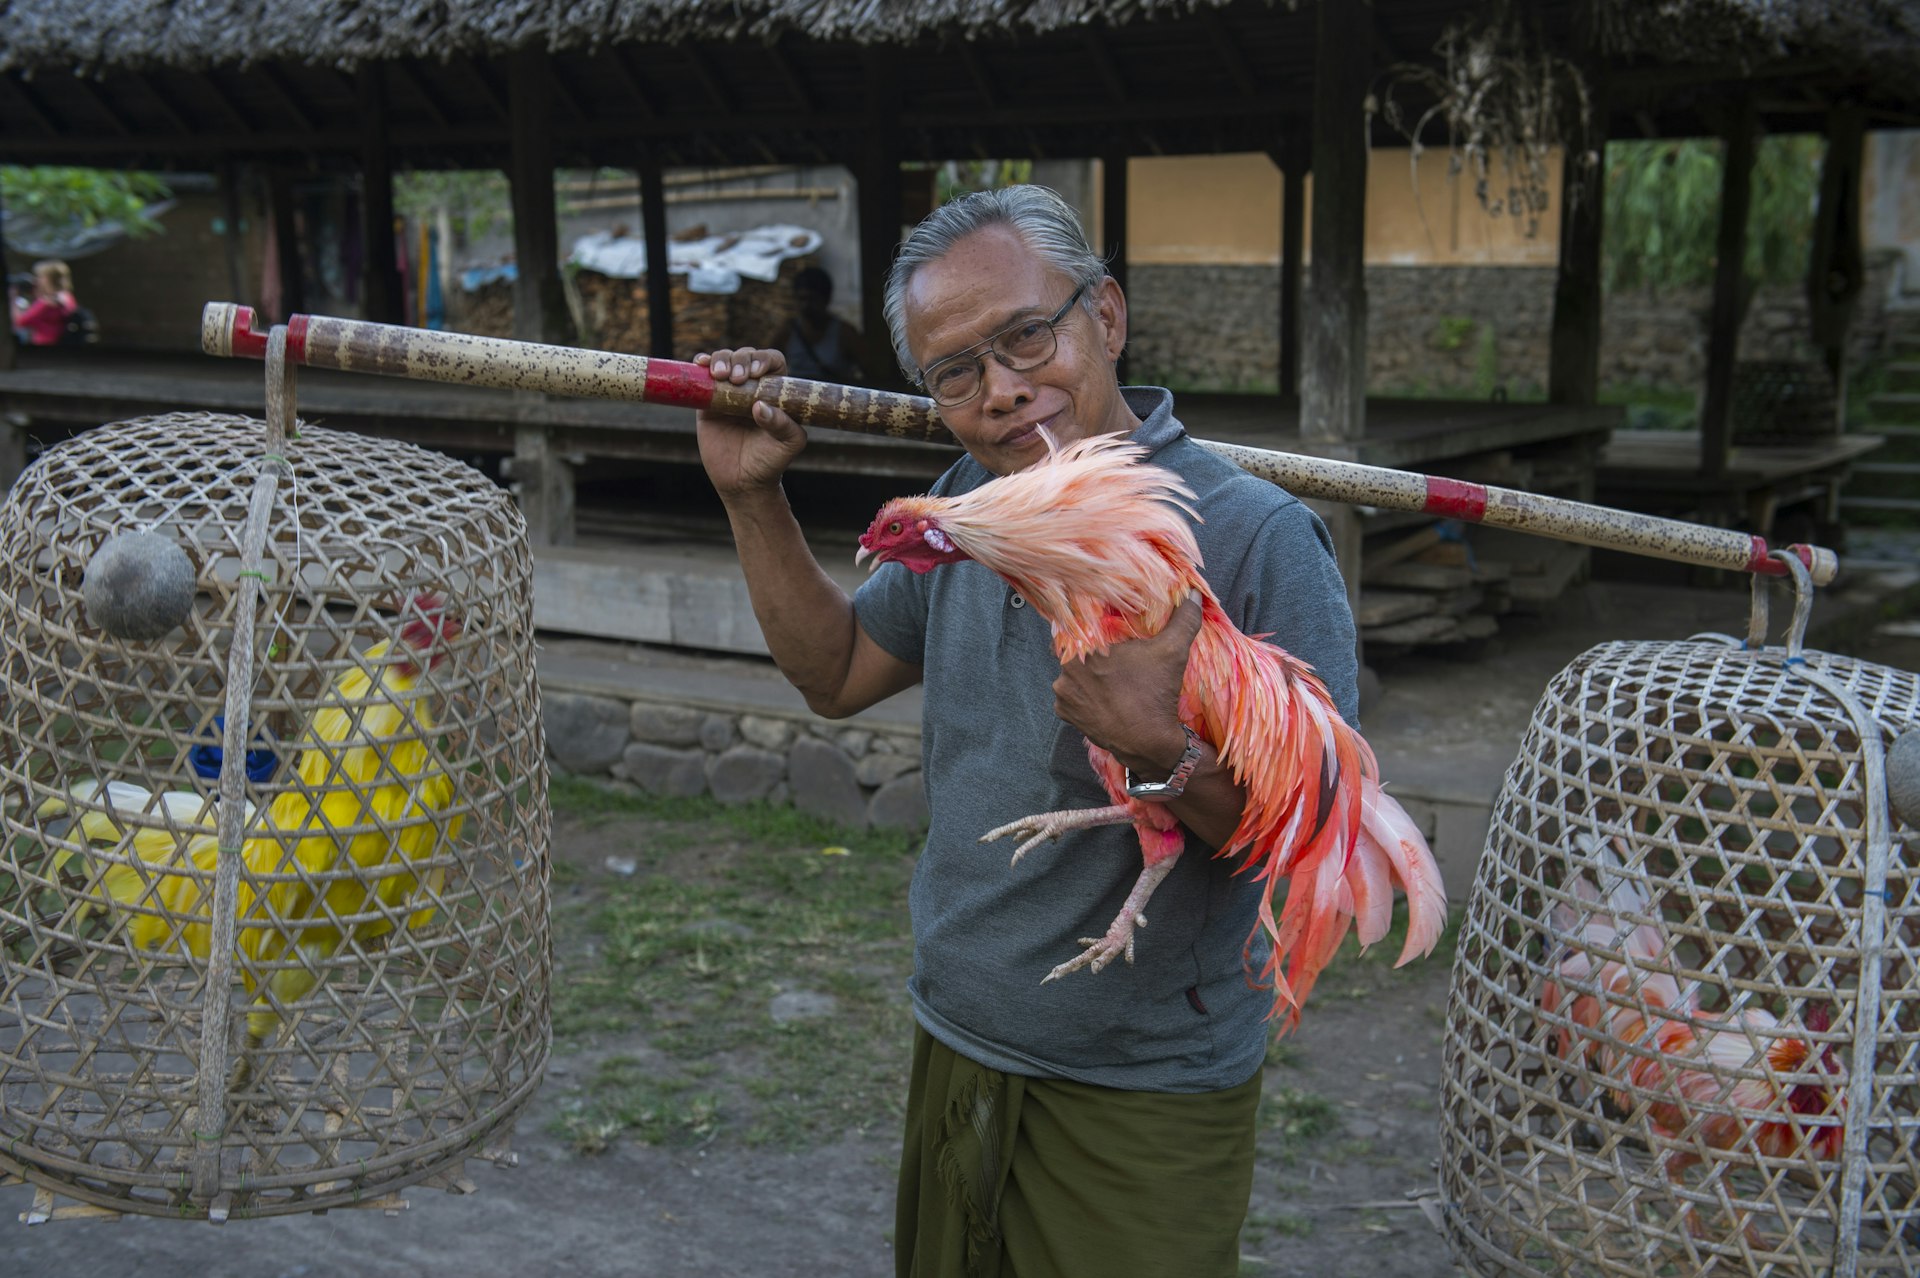 A man holds baskets with roosters and pink-dyed cock in Tenganan Village, Bali, Indonesia